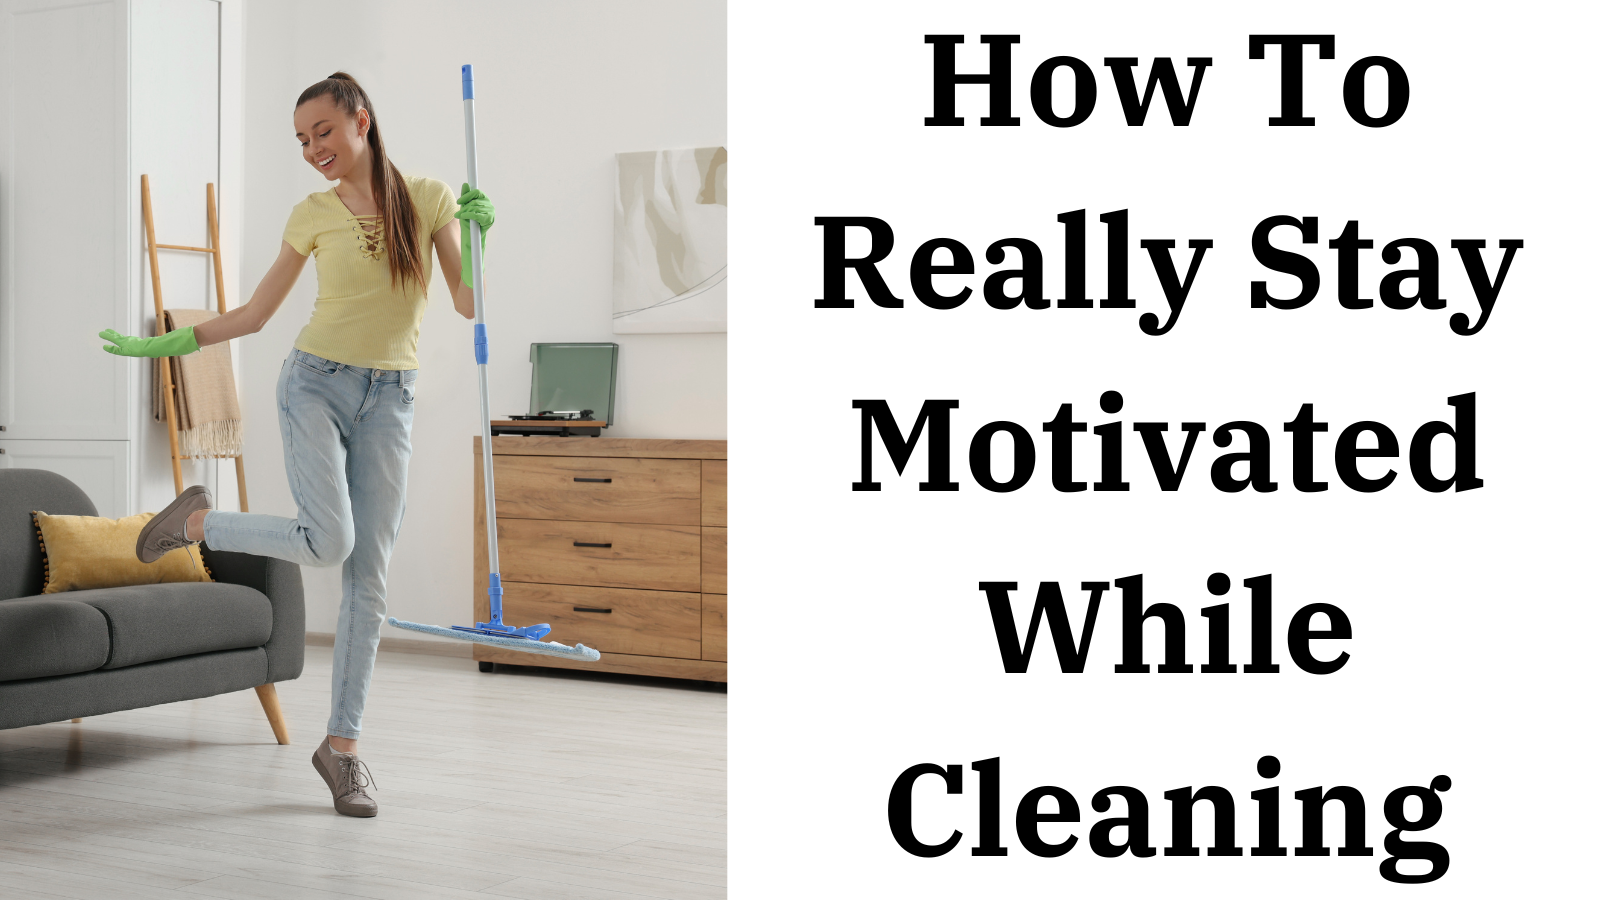 How To Really Stay Motivated While Cleaning